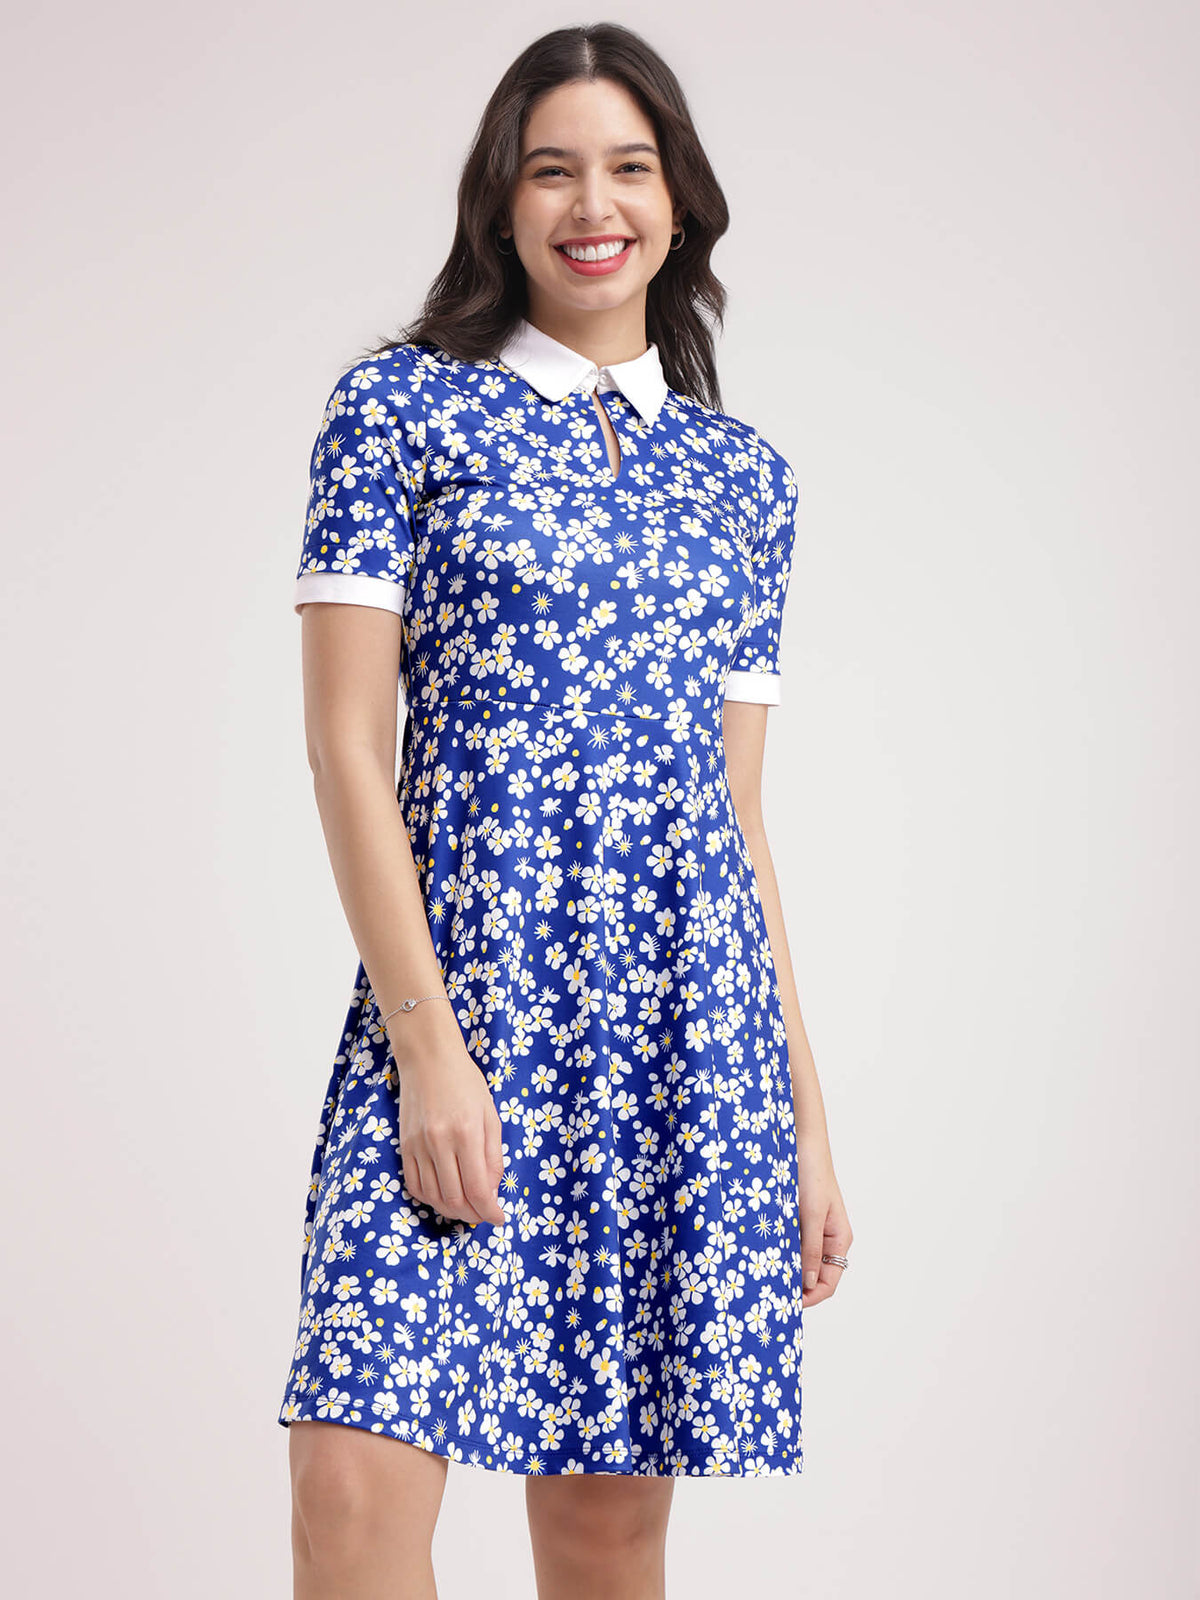 Floral Print Knitted Dress - Blue And White